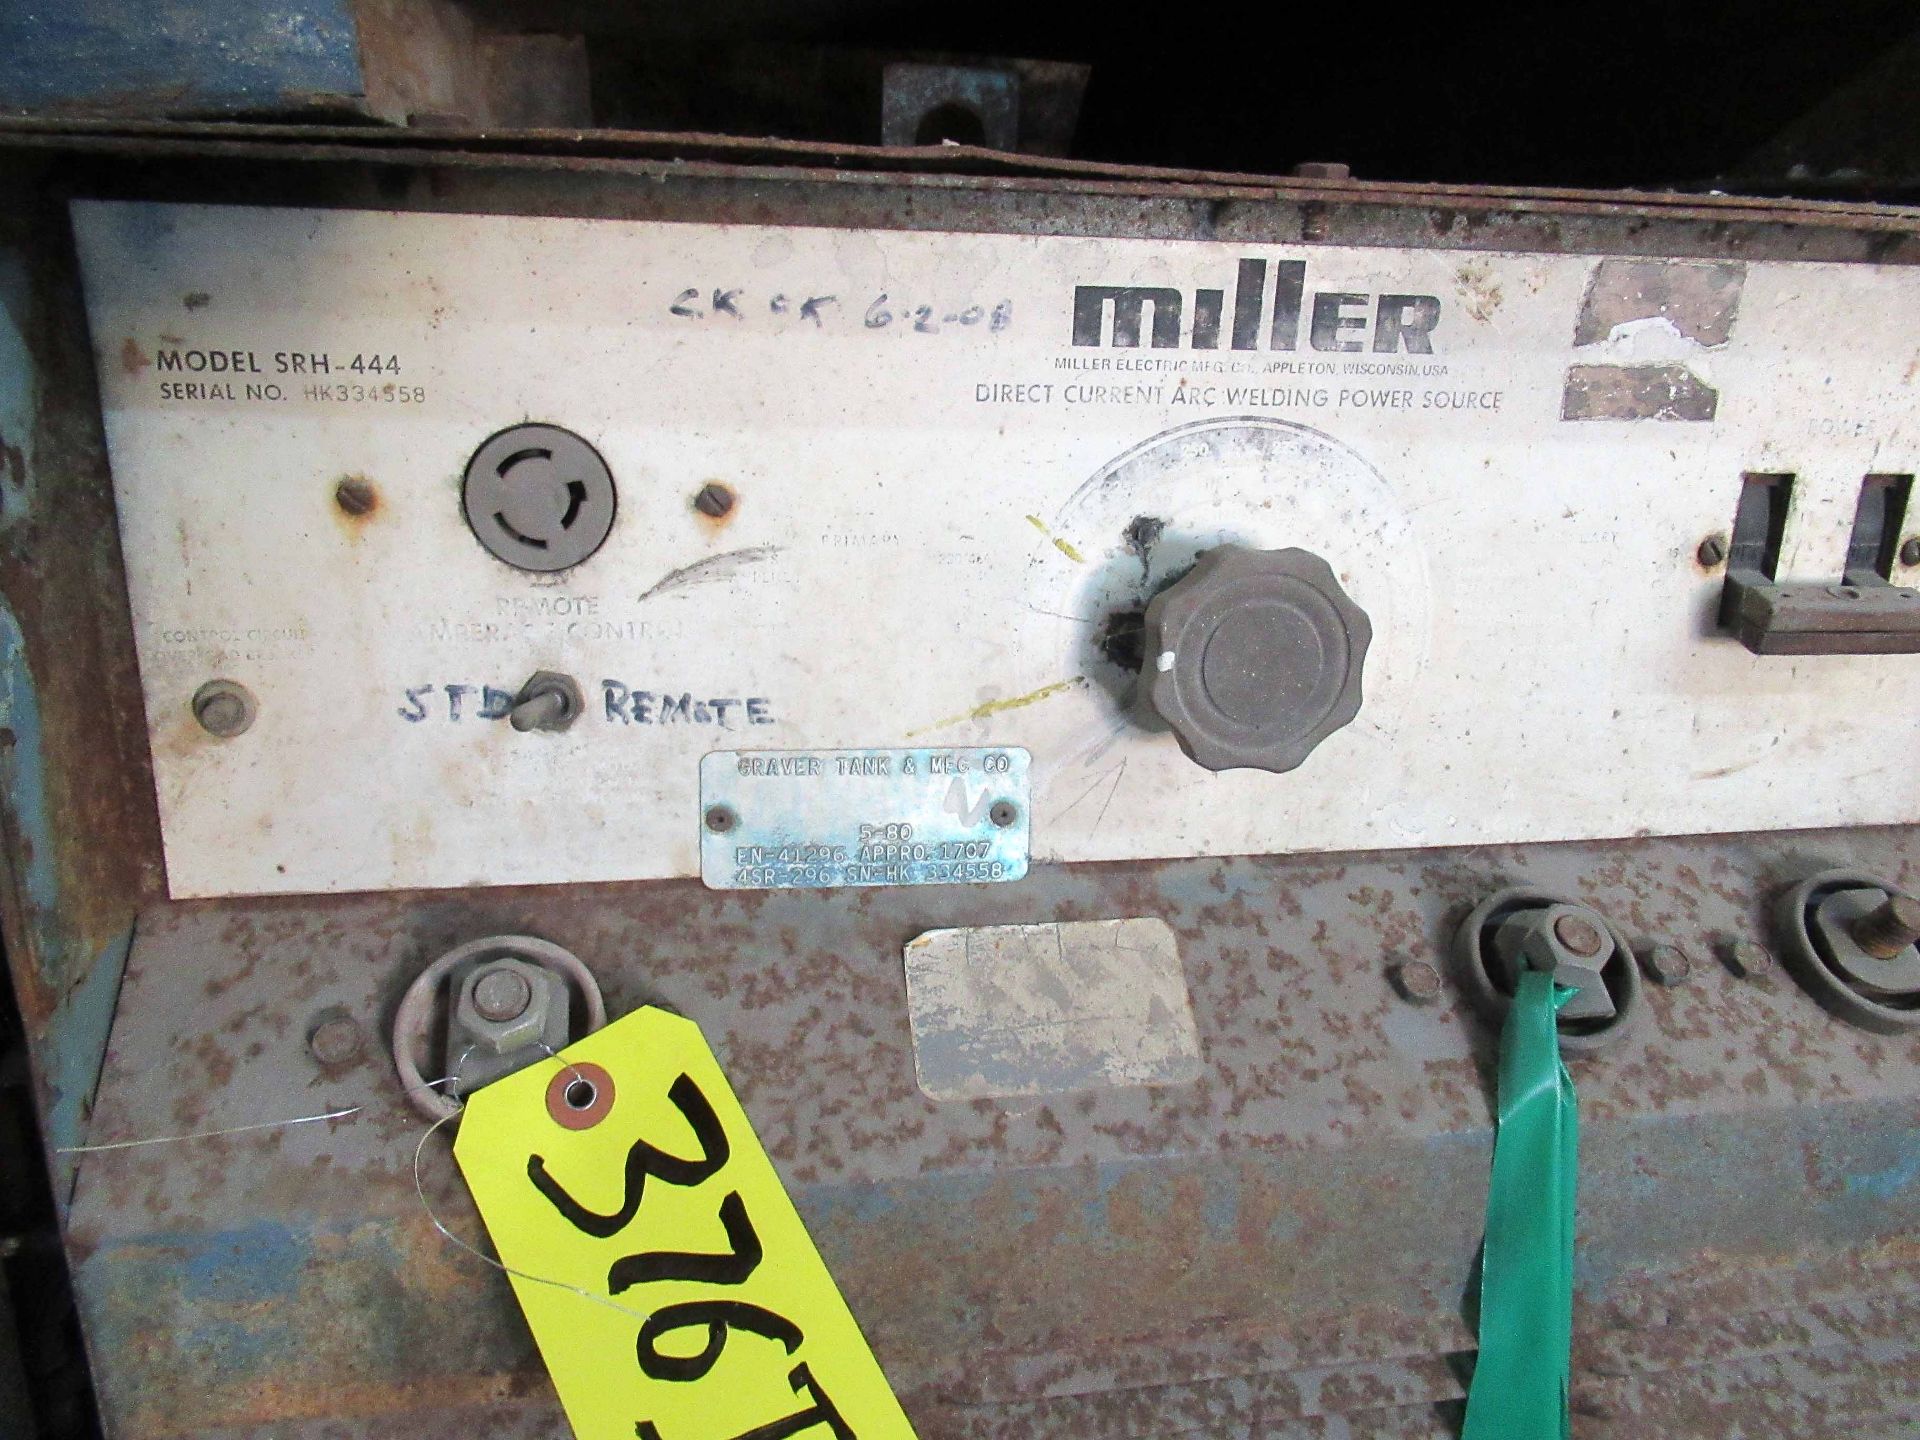 LOT OF WELDERS (3): (1) Miller SRH-444, (1) Miller SRH-333 & (1) N.A. (Located at: Precision Welding - Image 2 of 2